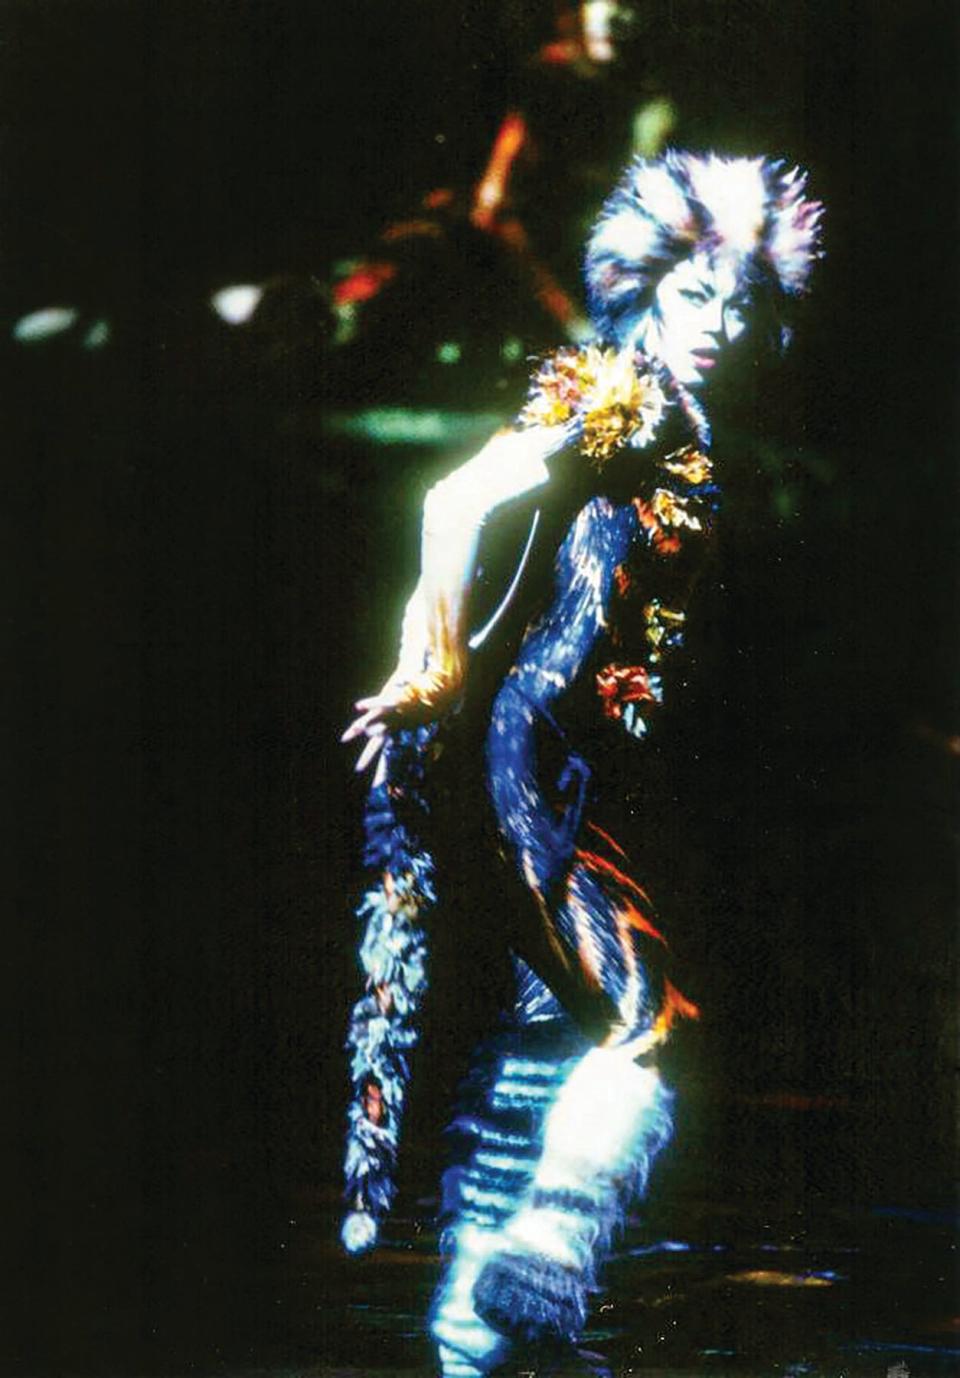 Emily Hsu plays the cat Demeter on Broadway’s Cats in 1997.